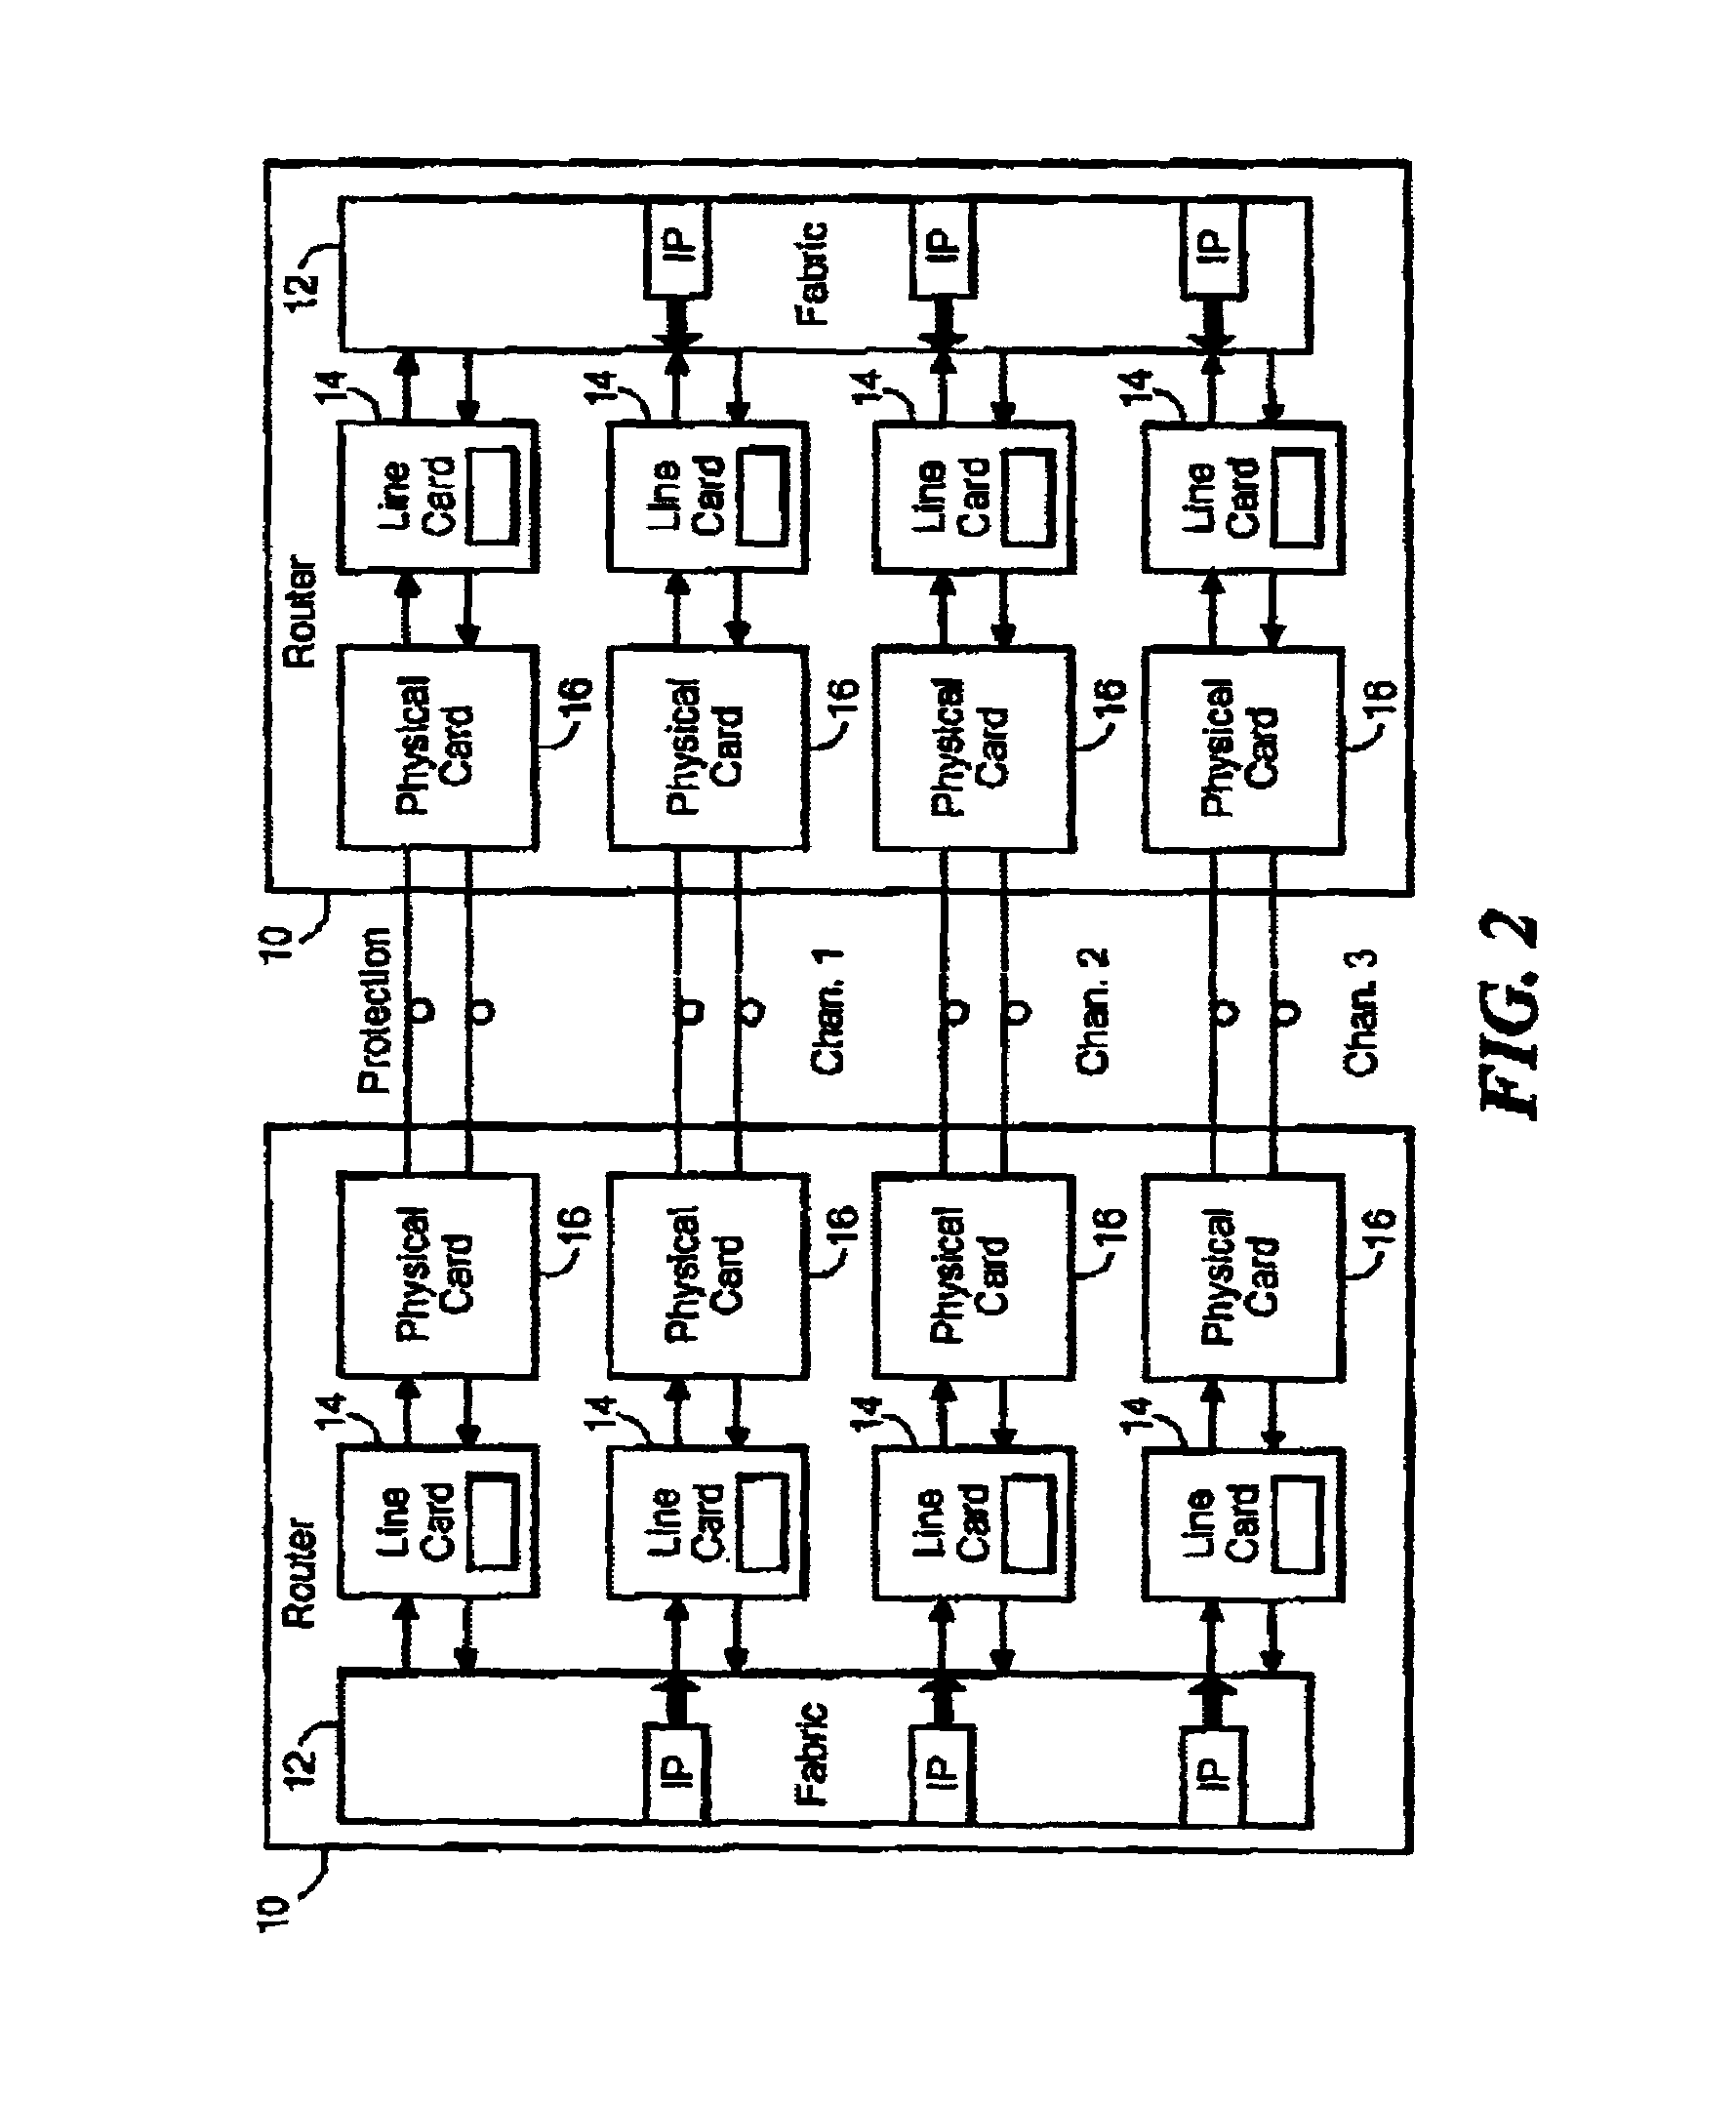 Mechanism for automatic protection switching in a router